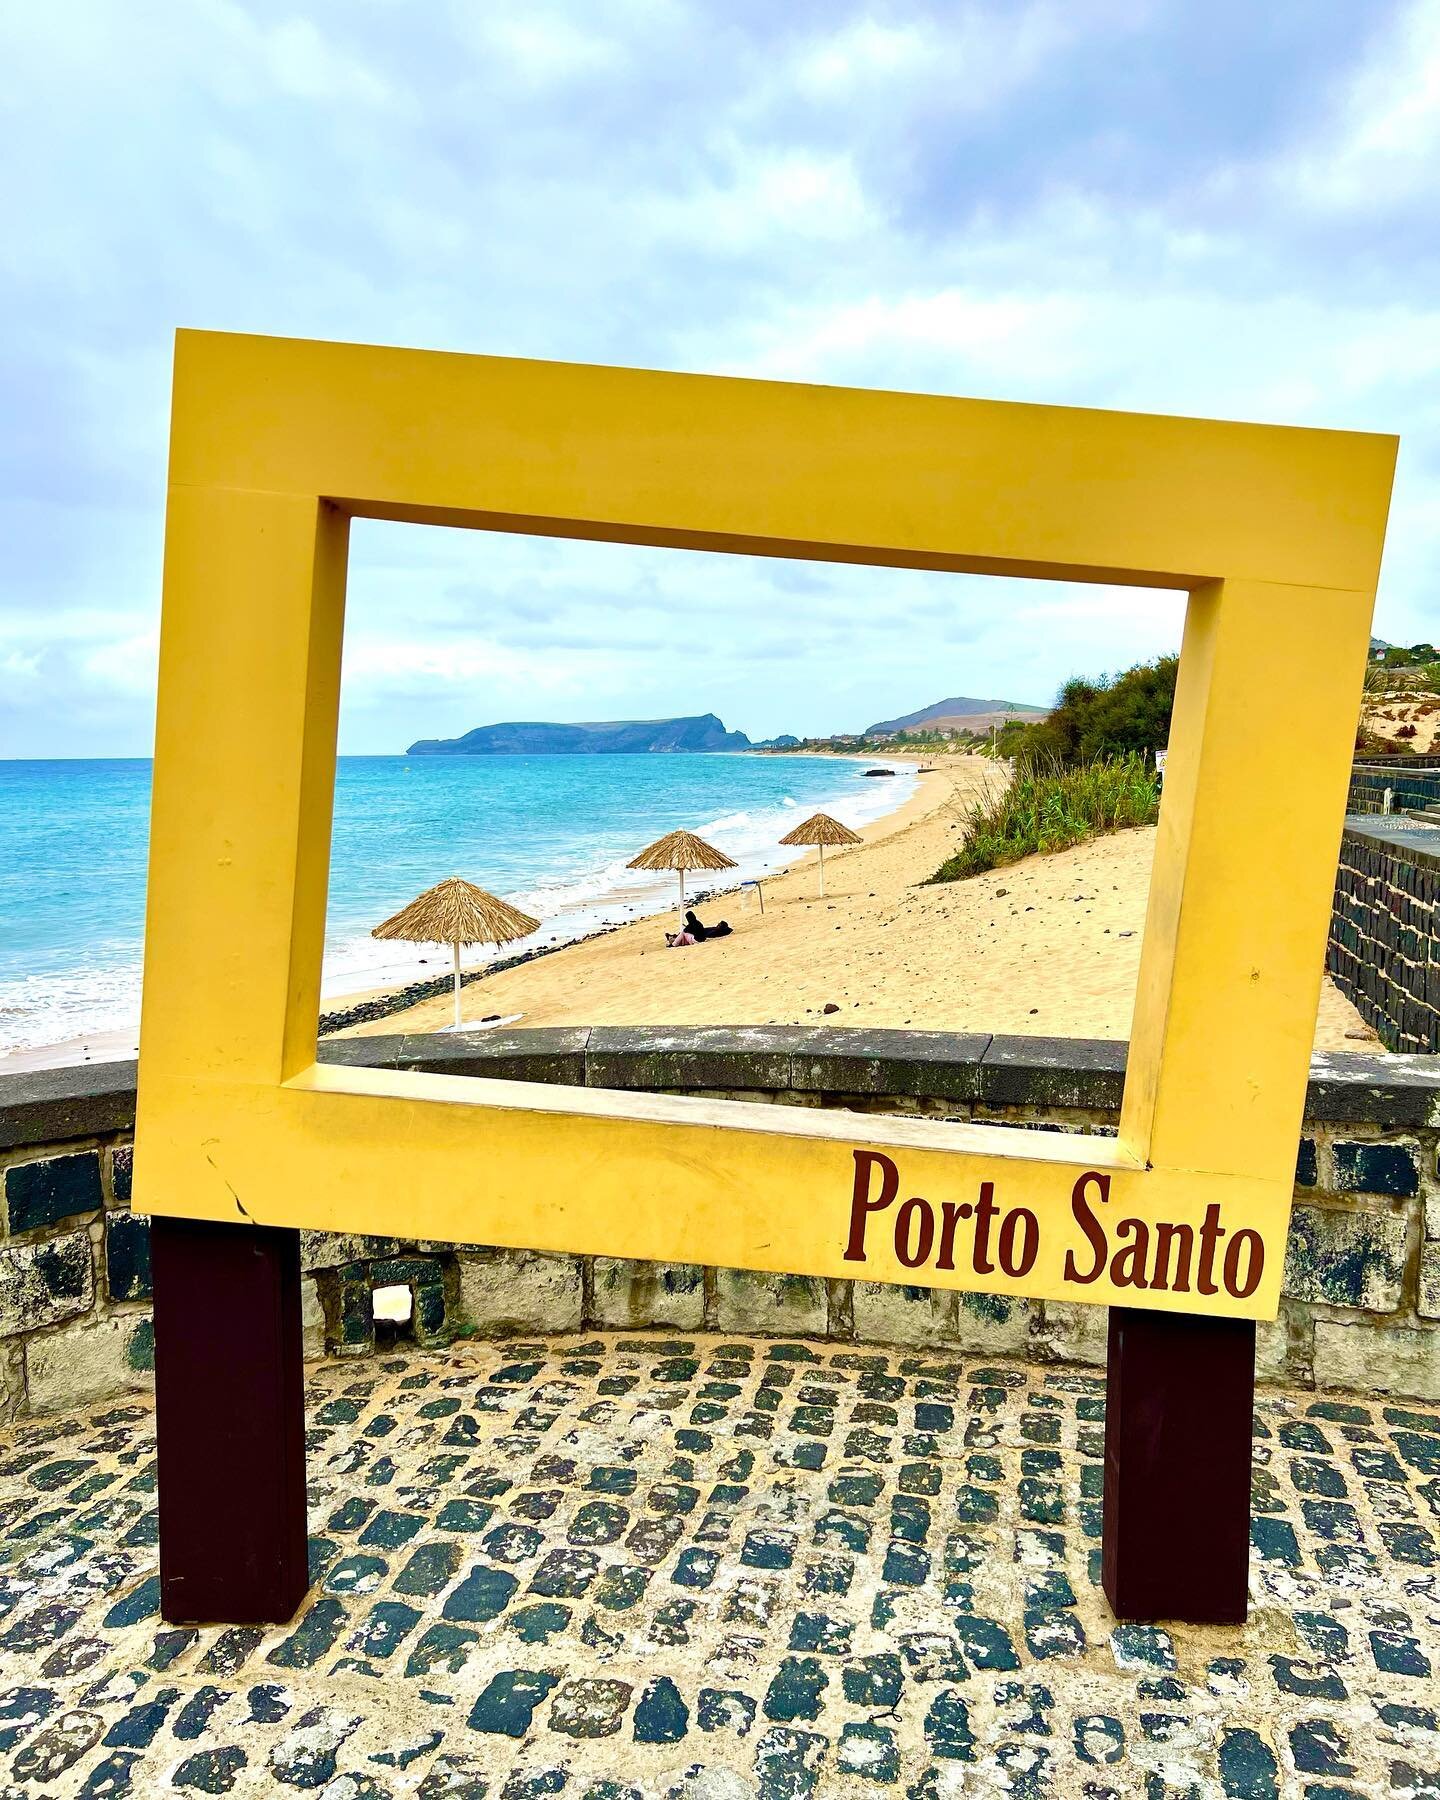 Postcard picture perfect 🫶🏝#loveportosanto with @lucyjanehunt 

&mdash;&mdash;&mdash;&mdash;&mdash;&mdash;&mdash;&mdash;&mdash;&mdash;&mdash;&mdash;&mdash;&mdash;&mdash;&mdash;&mdash;&mdash;&mdash;&mdash;&mdash;&mdash;
 #simionhawtinsmith
#bespokeu